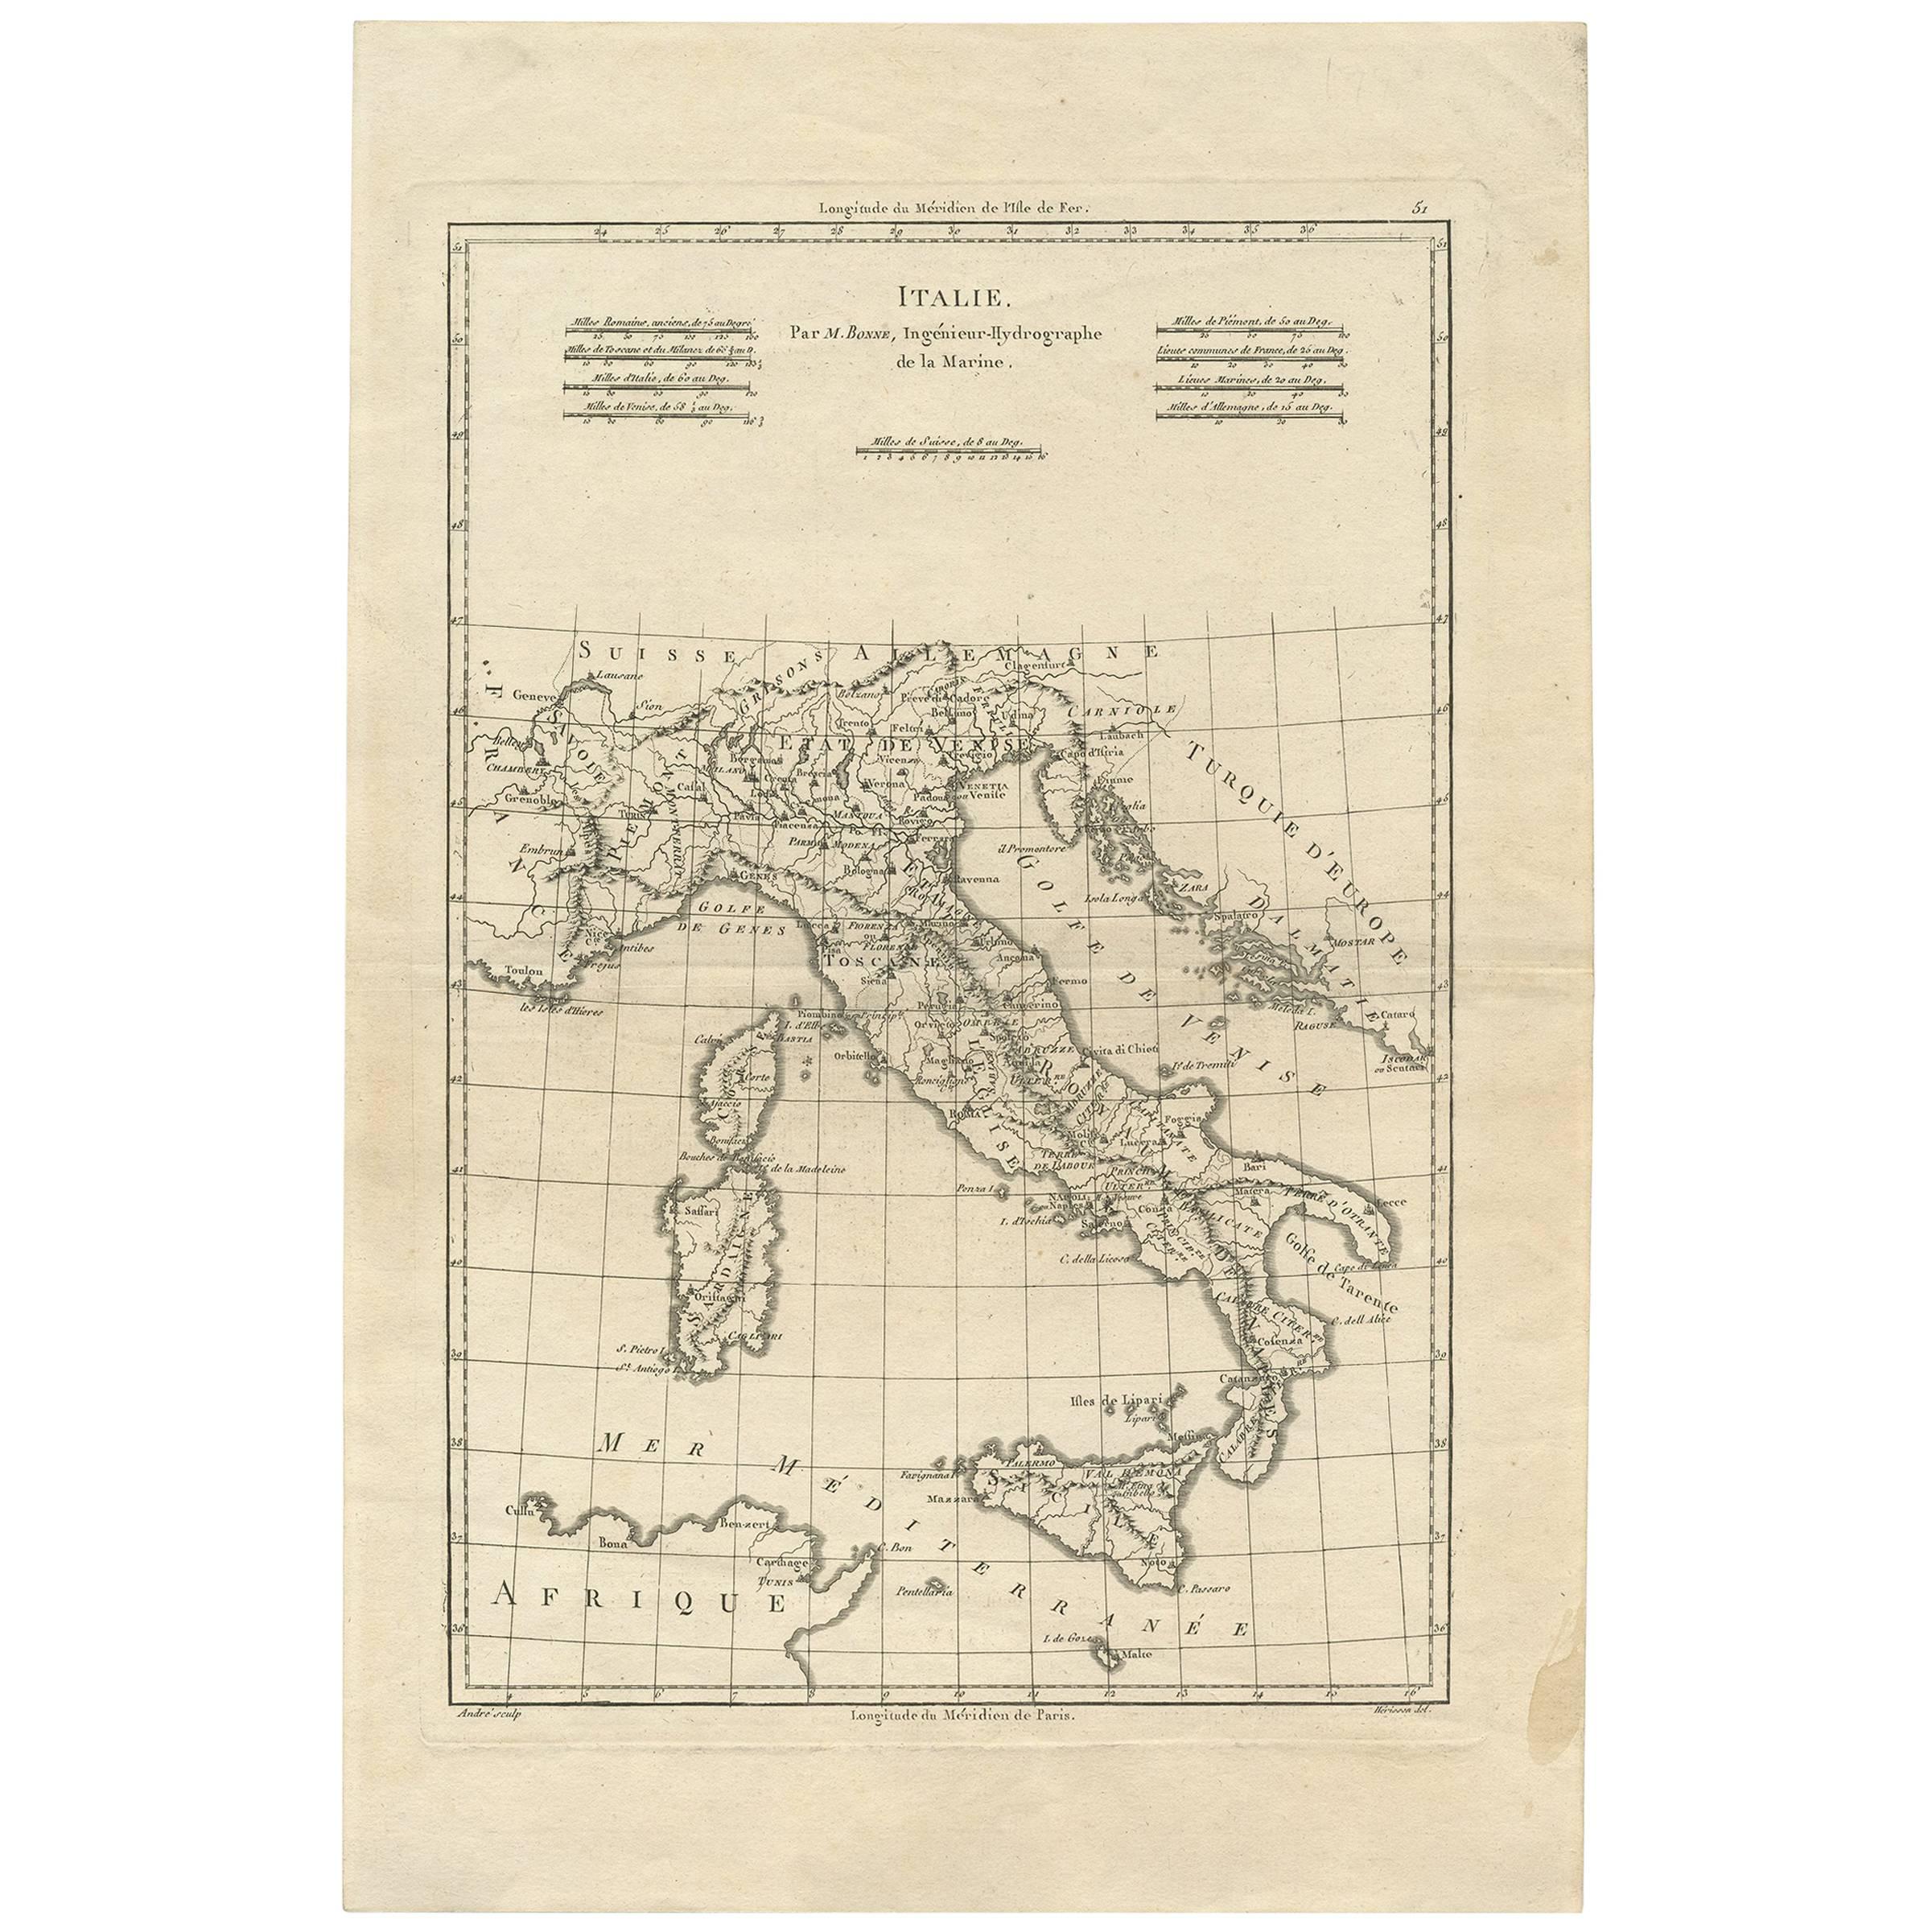 Antique Map of Italy by R. Bonne, circa 1780